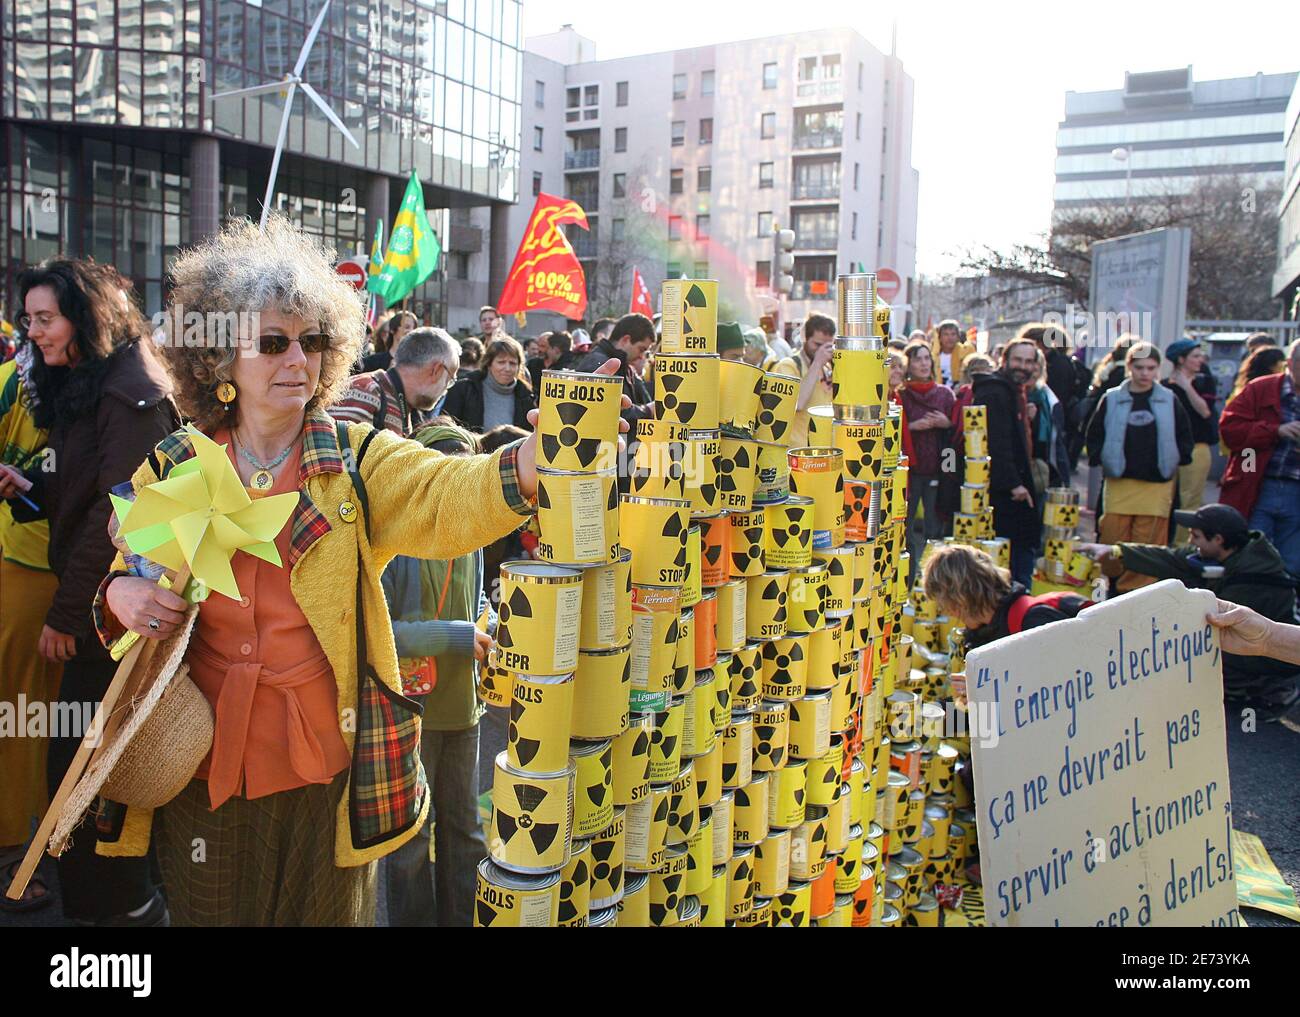 Around 4000 people demontrate to protest against plans to build the next generation of nuclear reactors EPR, in Lyon, France, on March 17, 2007. Photo by Vincent Dargent/ABACAPRESS.COM Stock Photo